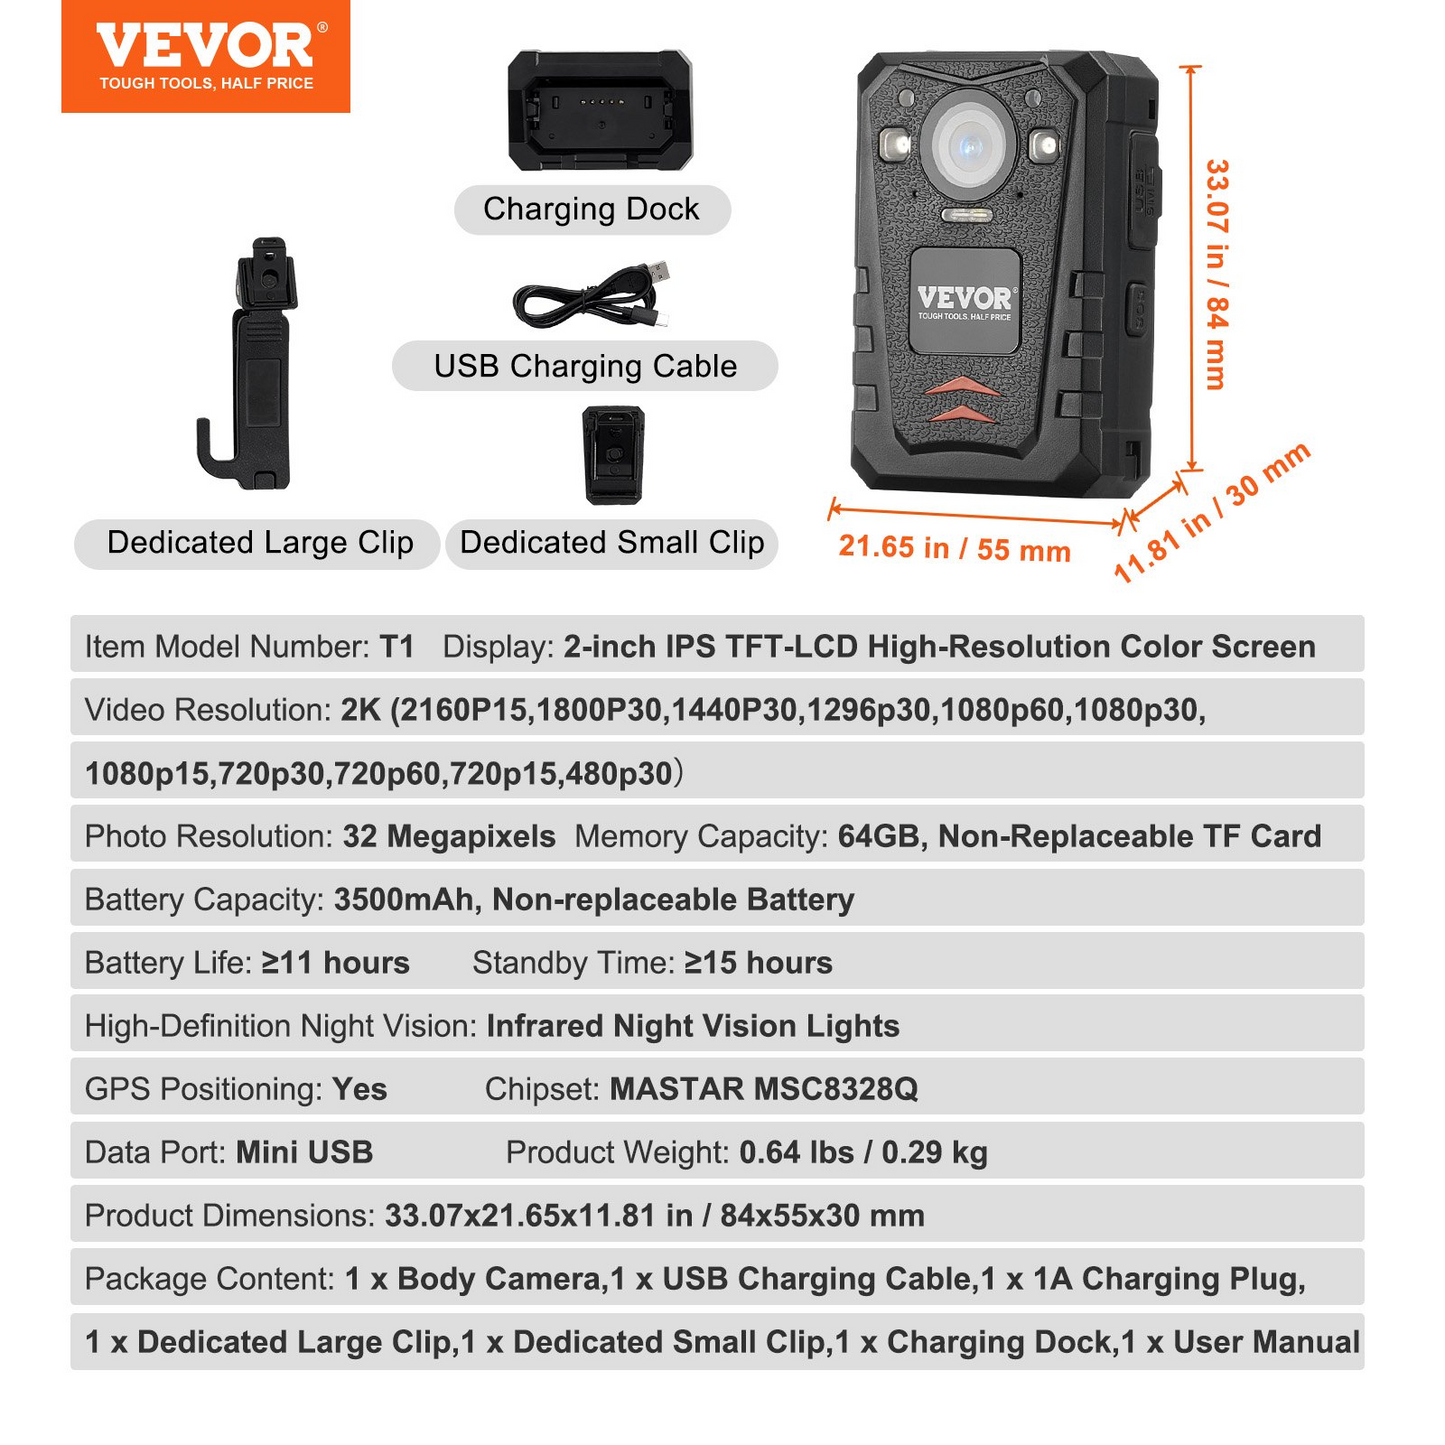 VEVOR 1440P HD Police Body Camera, 64GB Body Cam with Audio Video Recording Picture, Built-in 3500 mAh Battery, 2.0" LCD, Infrared Night Vision, Waterproof GPS Personal Body Cam for Law Enforcement, Goodies N Stuff